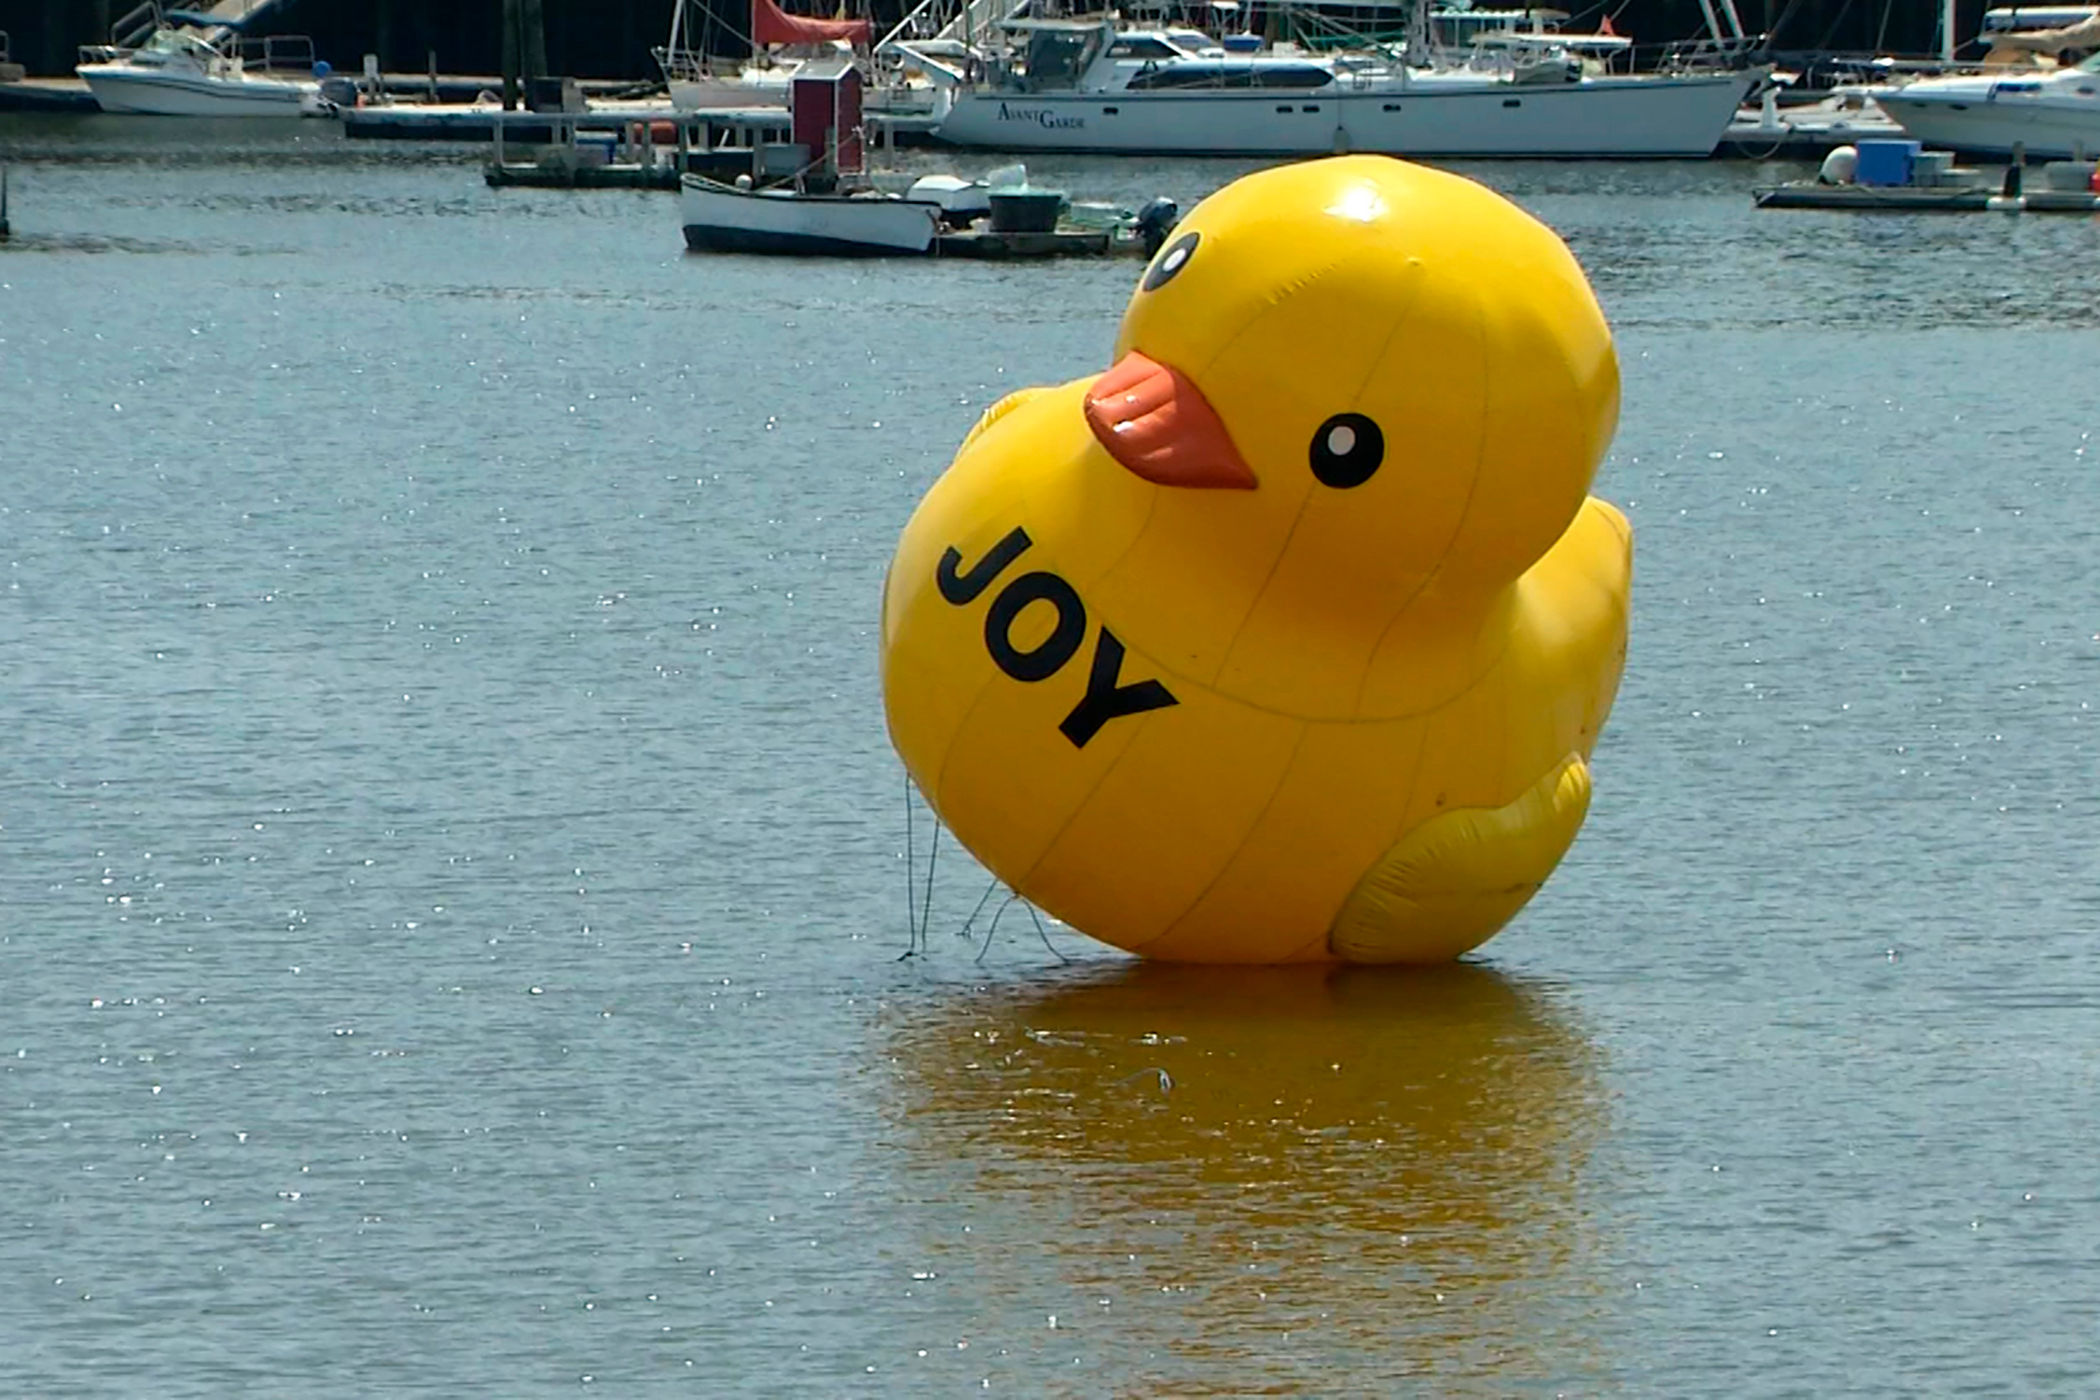 An inflated yellow duck is the ‘Maine’ reason for joy on the internet